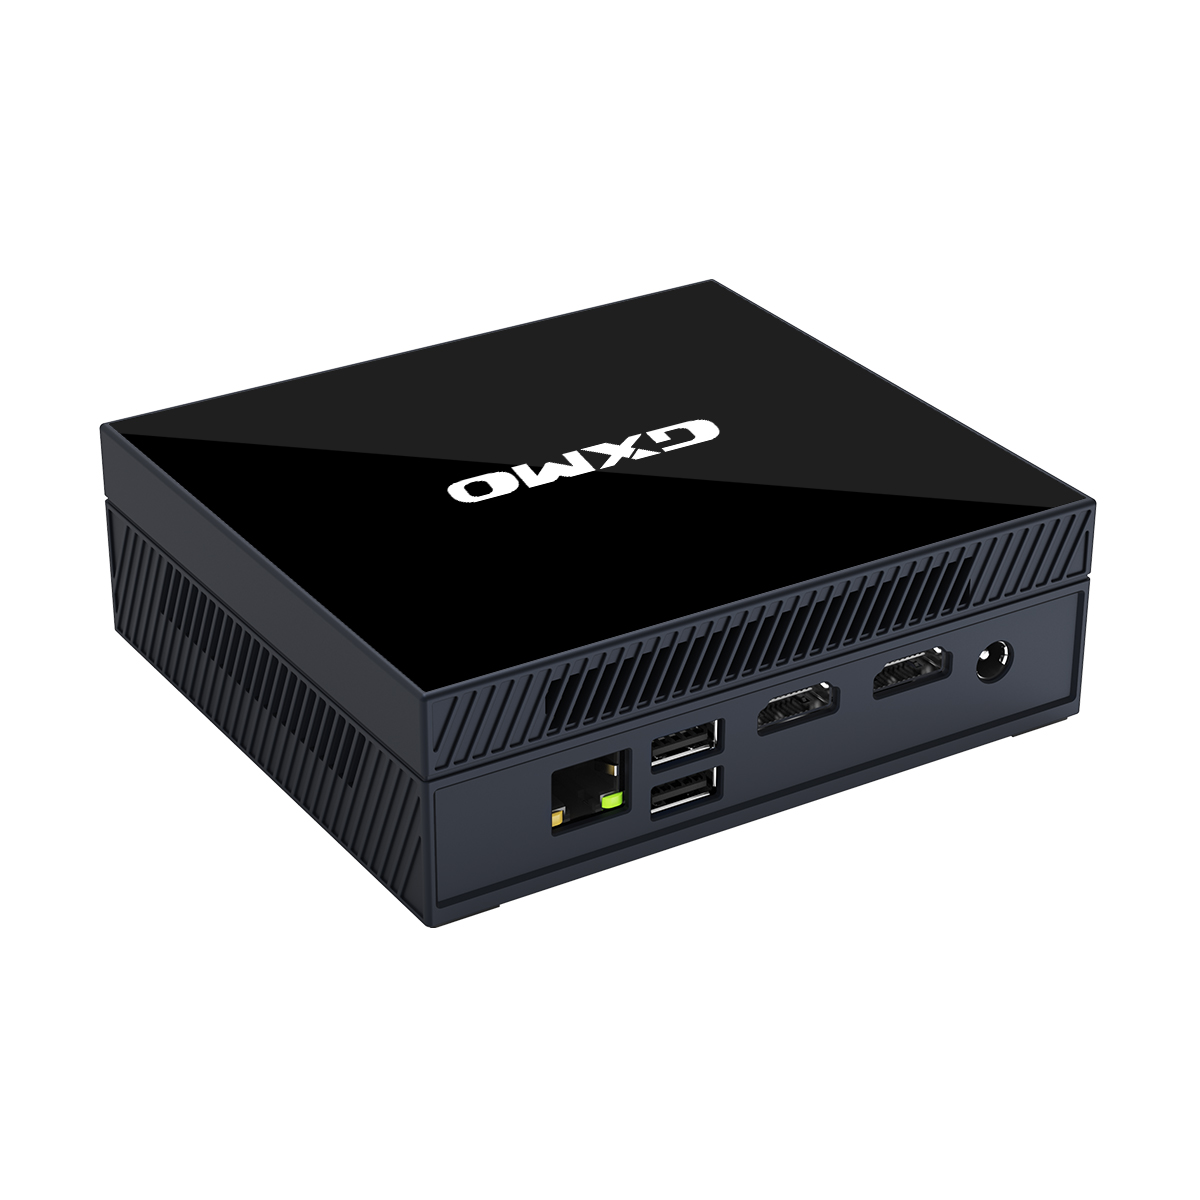 Find GXMO GX55 Intel 11th Jasper Laker N5105 Mini PC 8GB DDR4-2933 RAM 256GB NVMe SSD Quad Core 2.0GHz to 2.9GHz WiFi5 BT4.2 1000M LAN HDMI Type-C Trible Screen 4K HD 60 FPS Windows10 Mini Computer for Sale on Gipsybee.com with cryptocurrencies